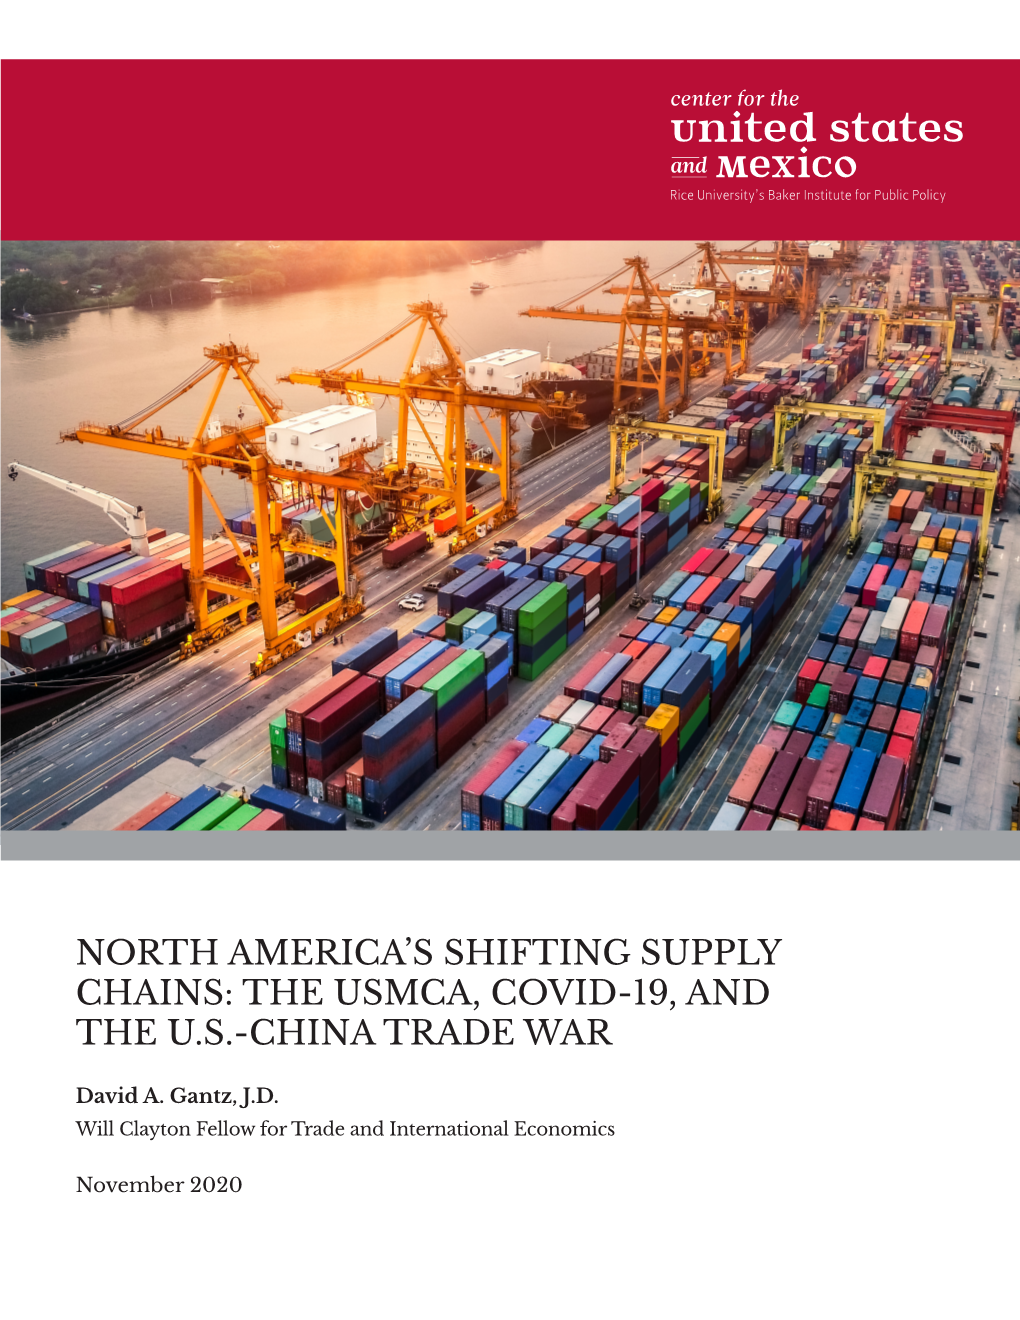 North America's Shifting Supply Chains: the USMCA, COVID-19